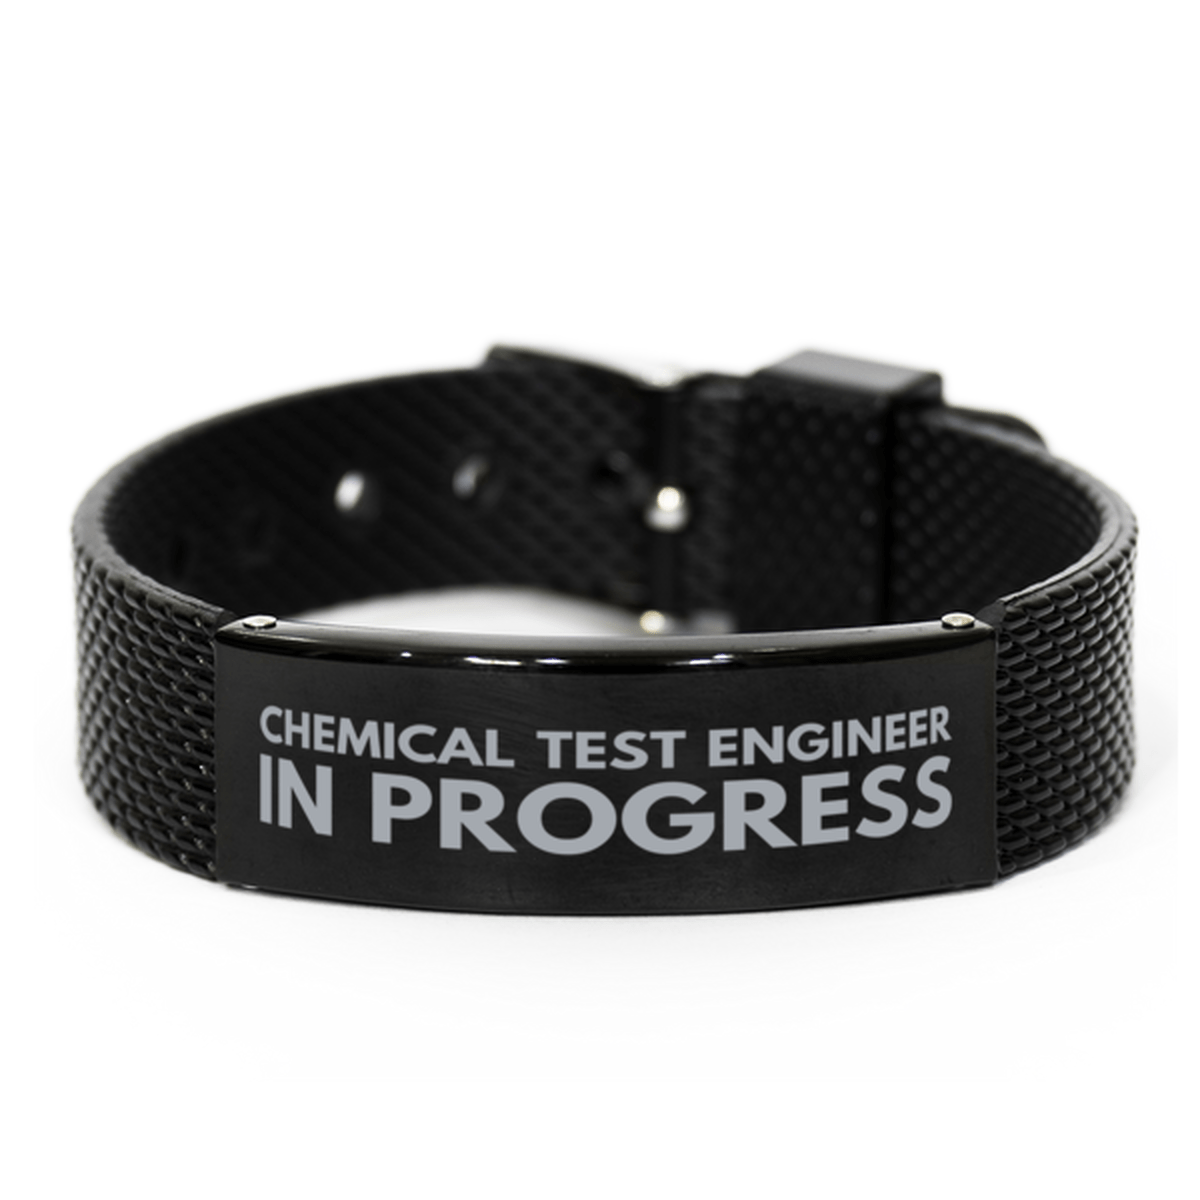 Inspirational Chemical Test Engineer Black Shark Mesh Bracelet, Chemical Test Engineer In Progress, Best Graduation Gifts for Students